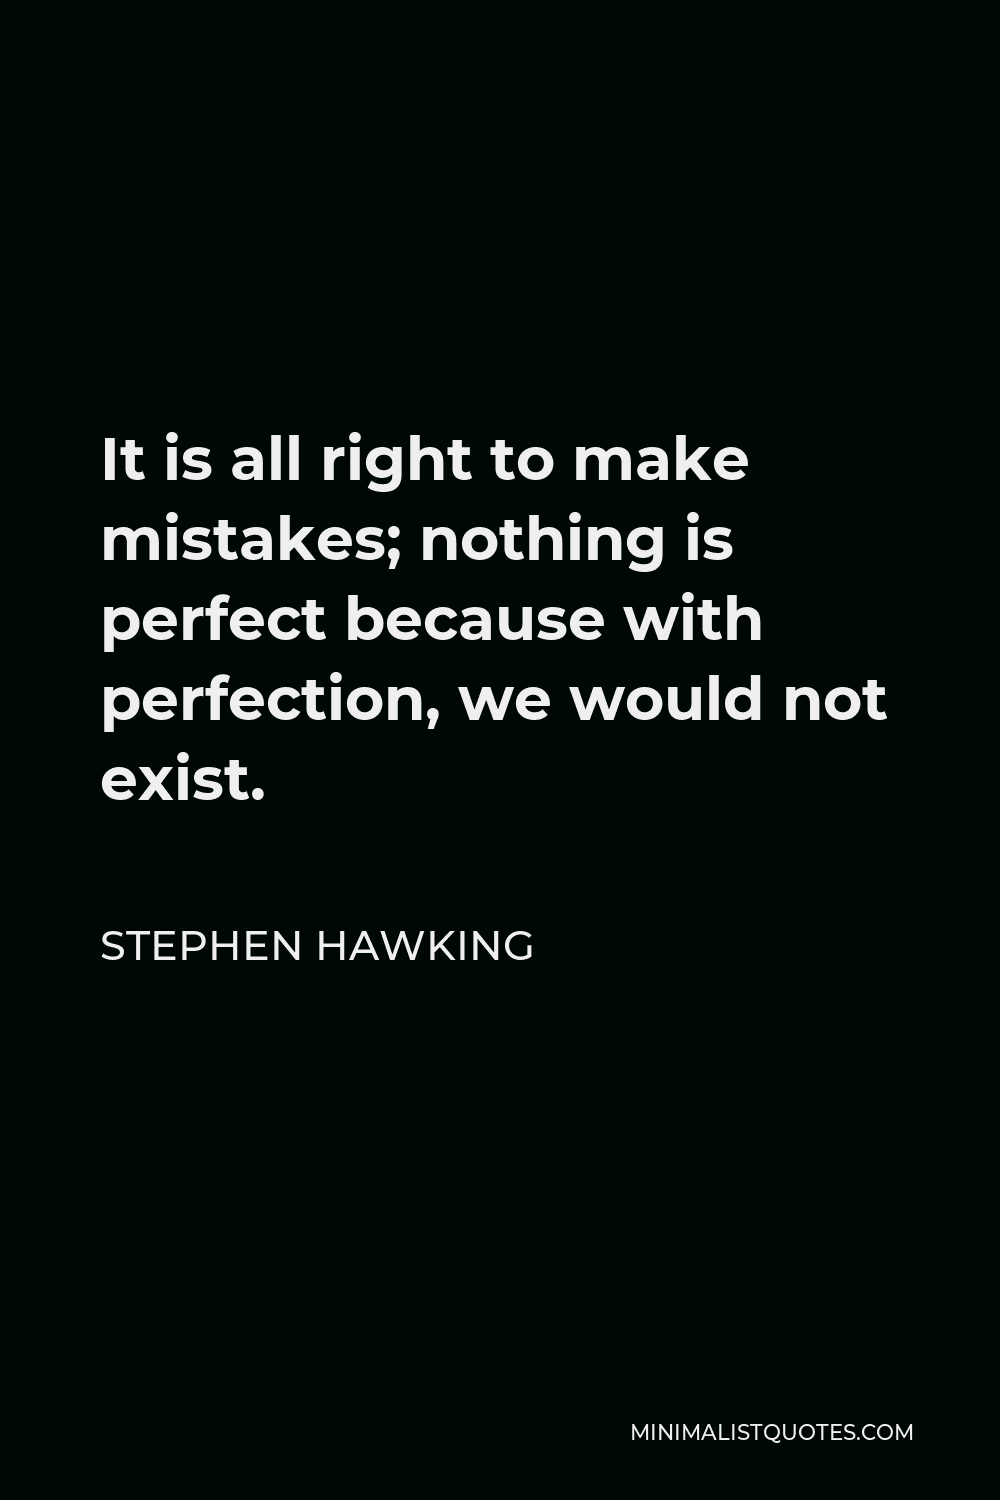 Stephen Hawking Quote - It is all right to make mistakes; nothing is perfect because with perfection, we would not exist.